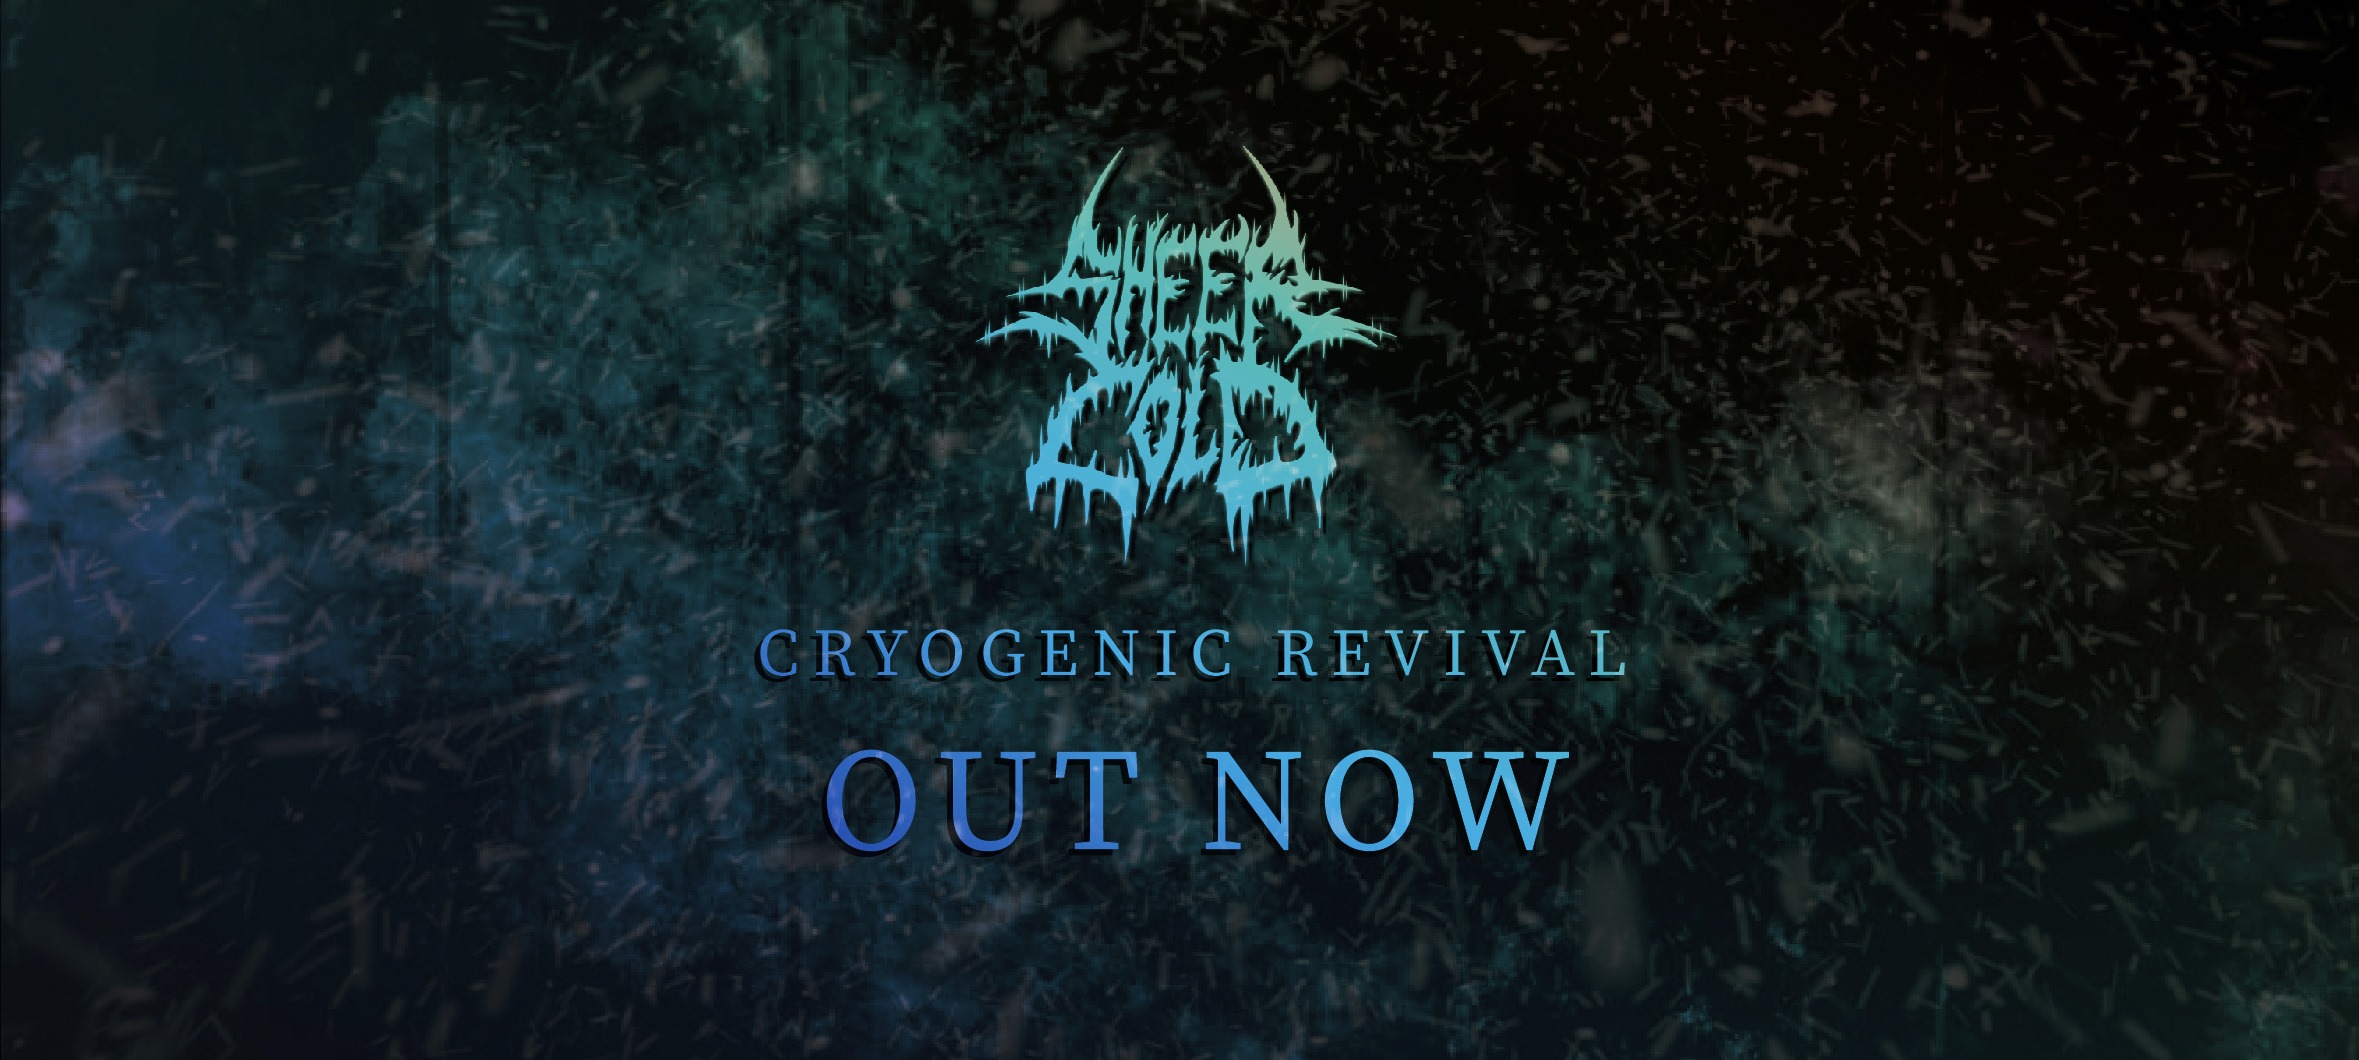 SHEER COLD release ‘CRYOGENIC REVIVAL’